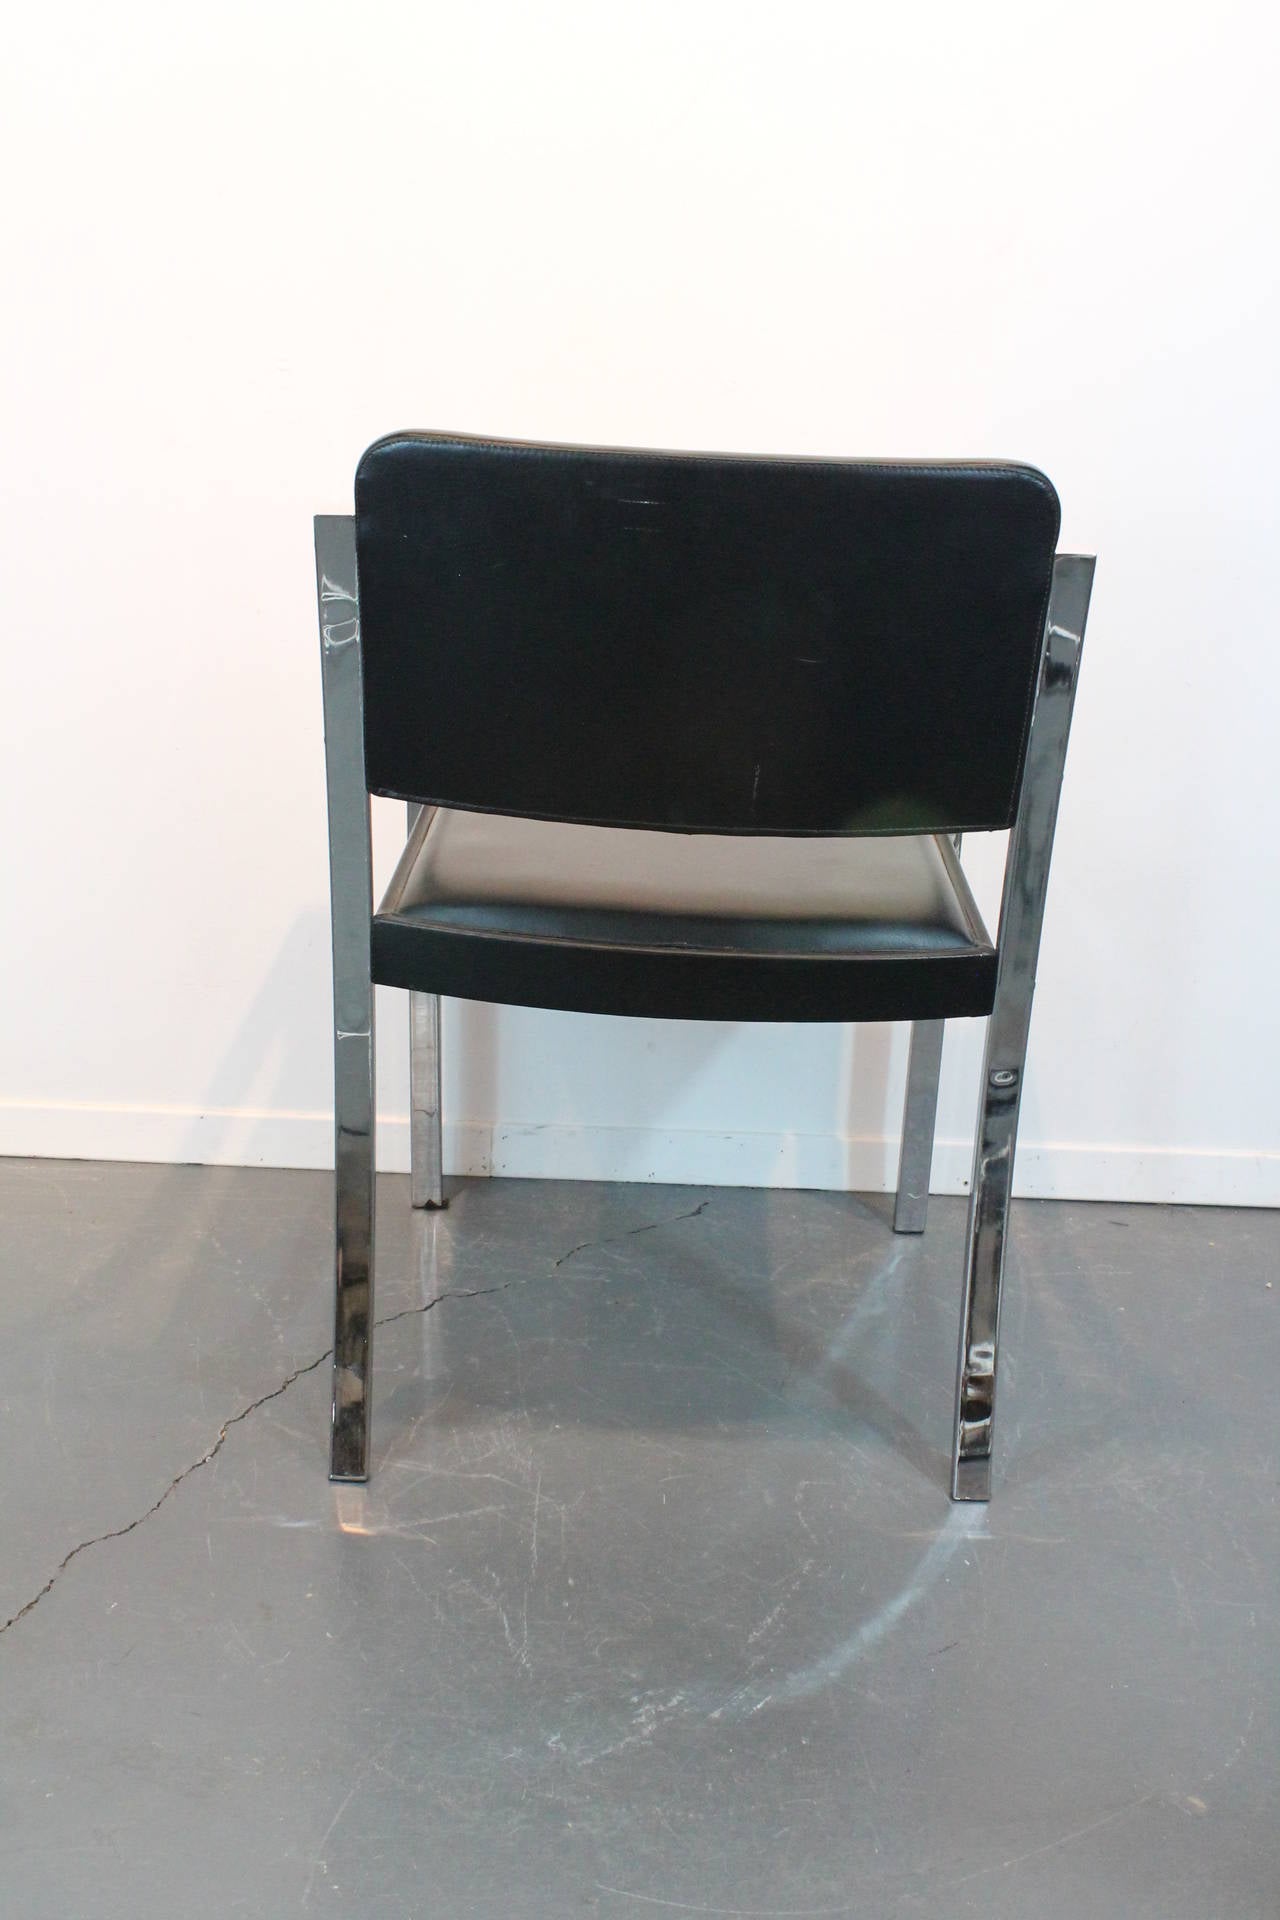 Very clean minimalist designed chrome and black vinyl 1970s dining chairs.